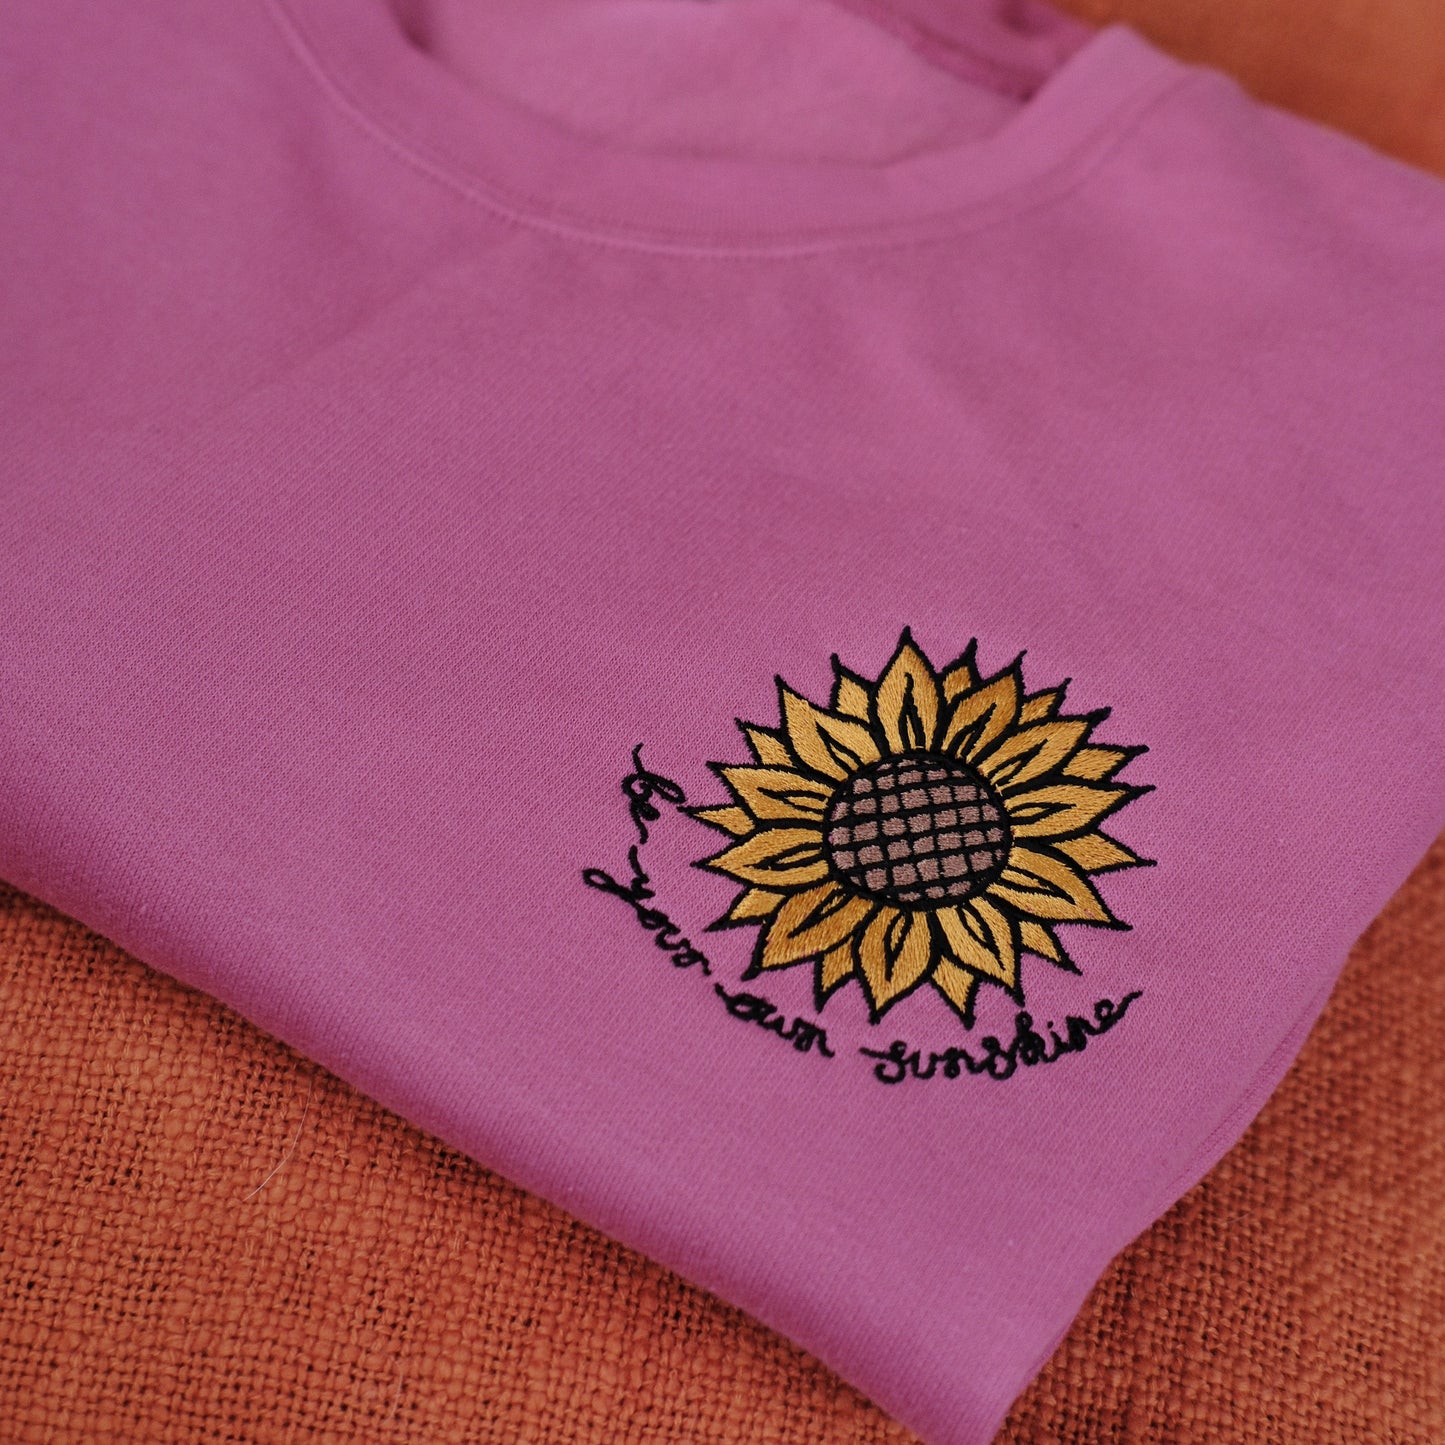 be your own sunshine embroidered sweatshirt - deep pink